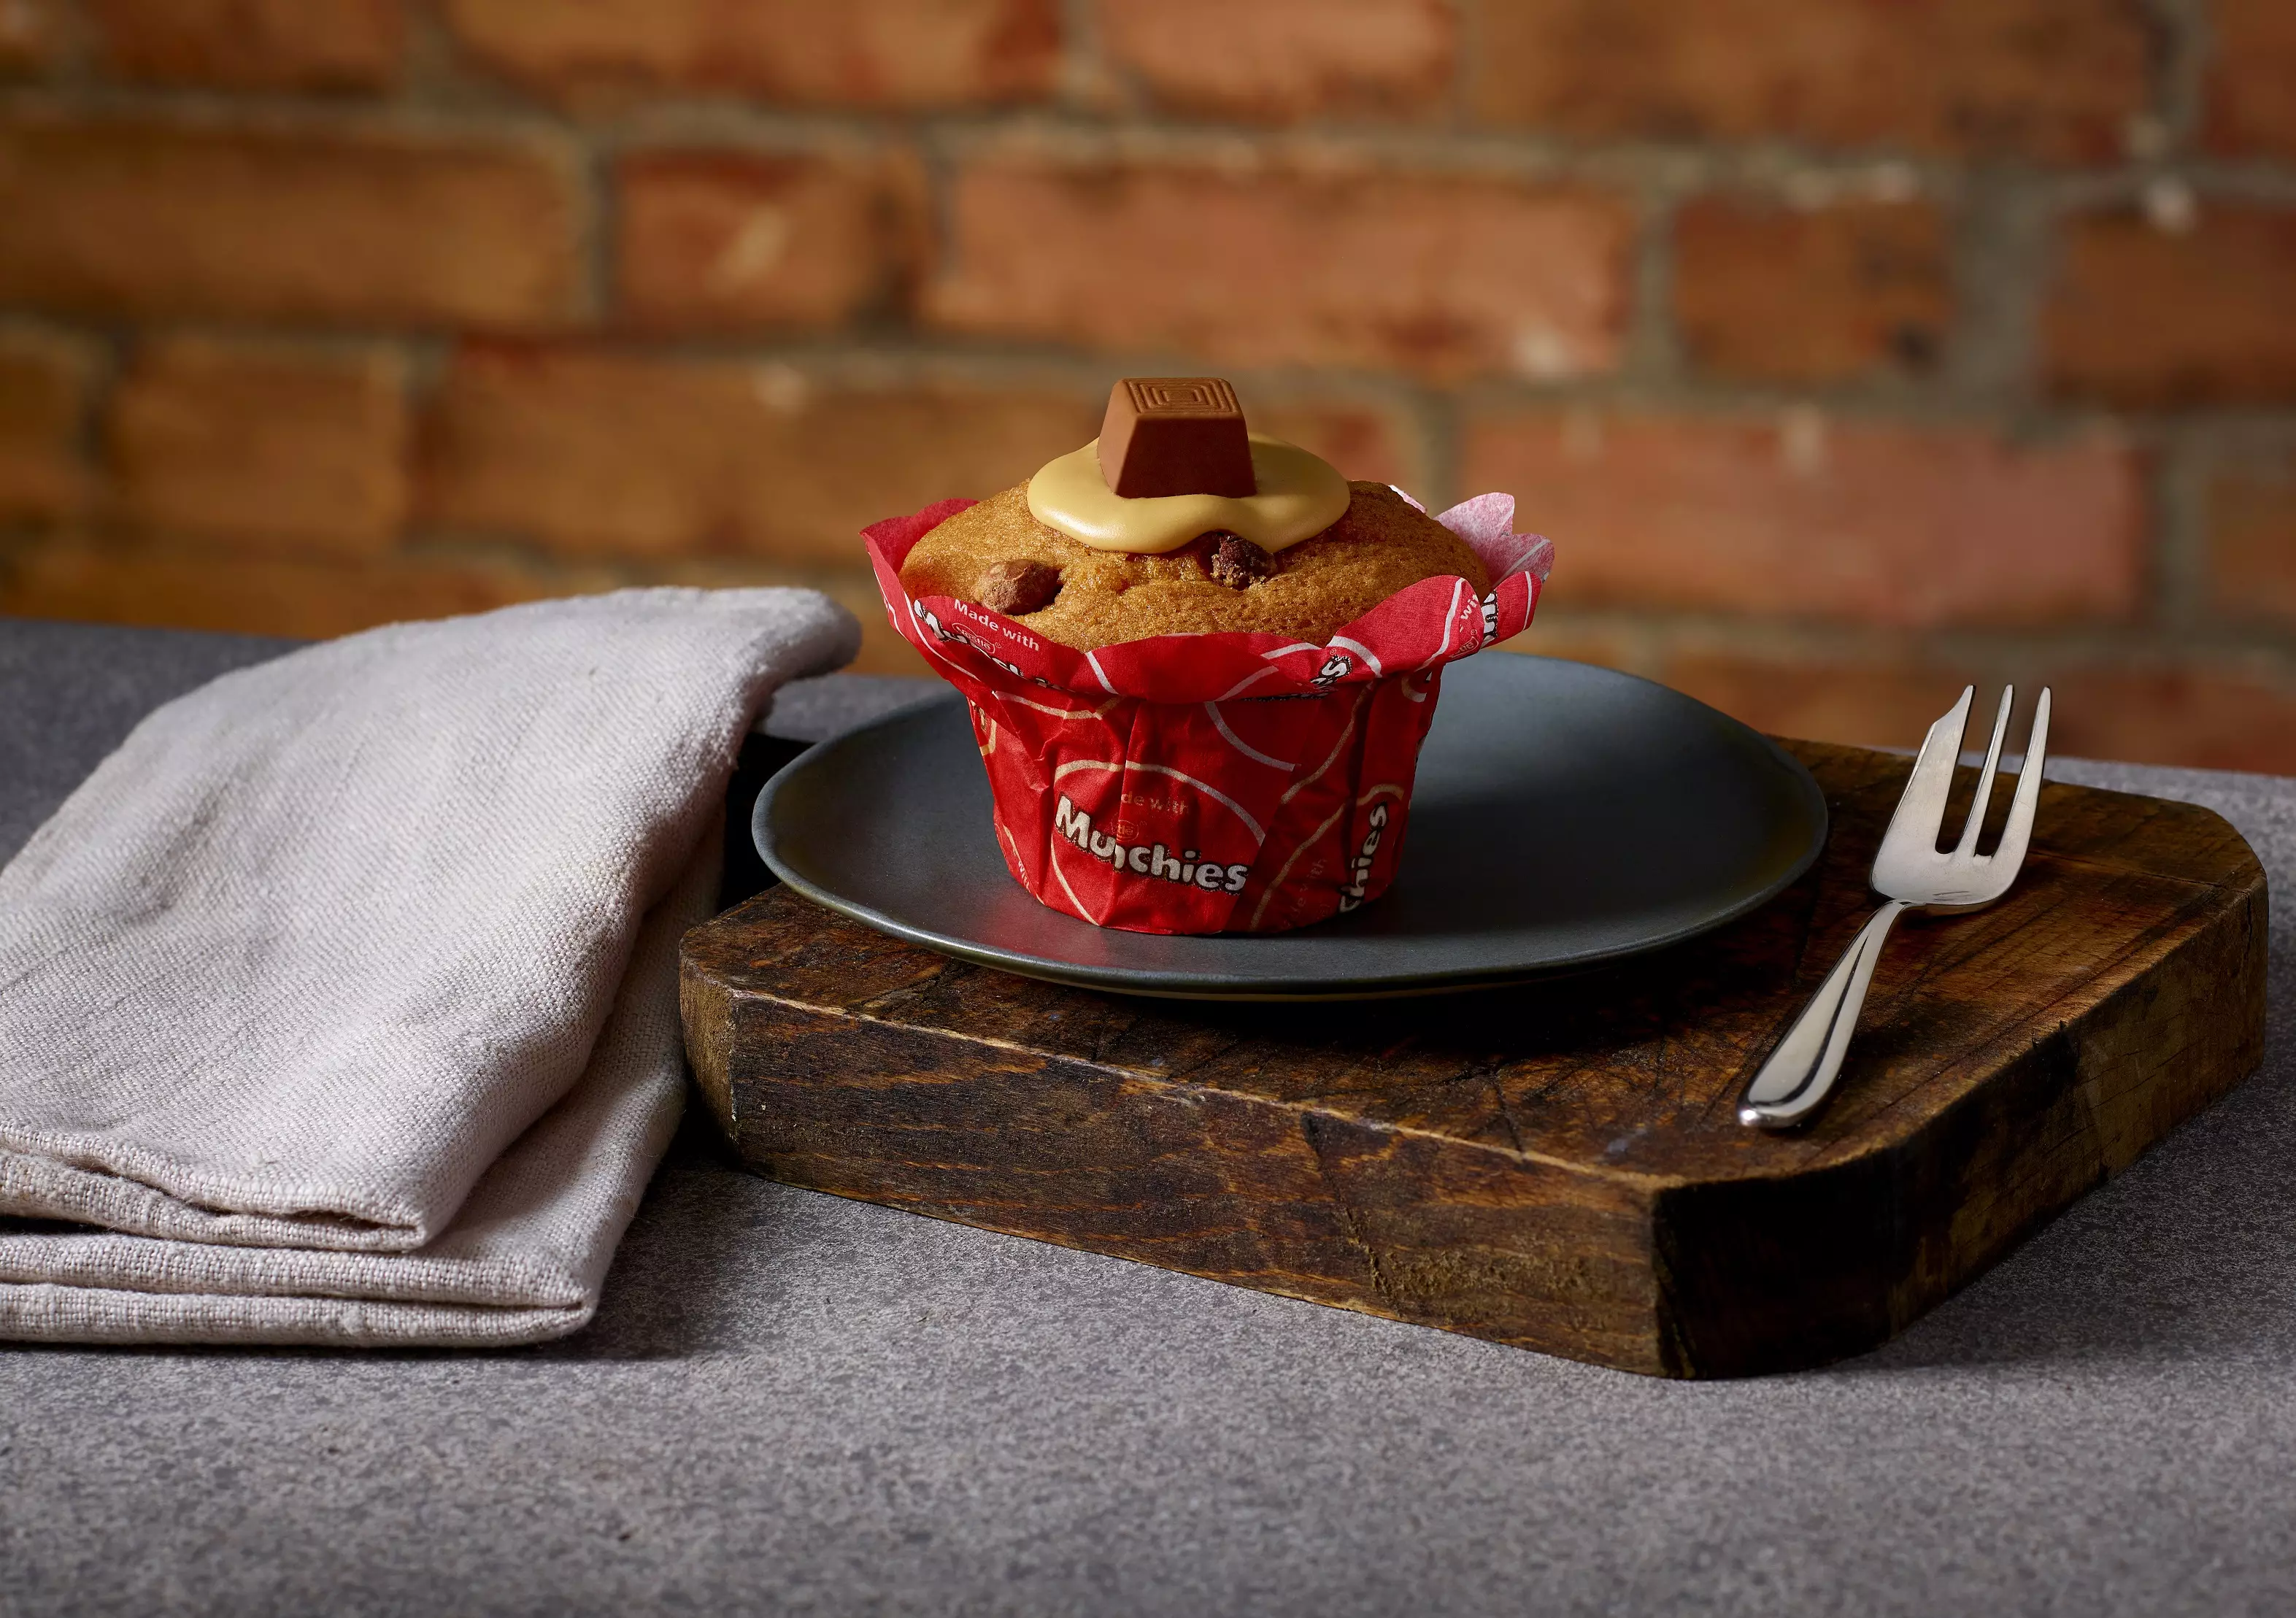 Also gracing the new menu is a Caramel Muffin made from Munchies (